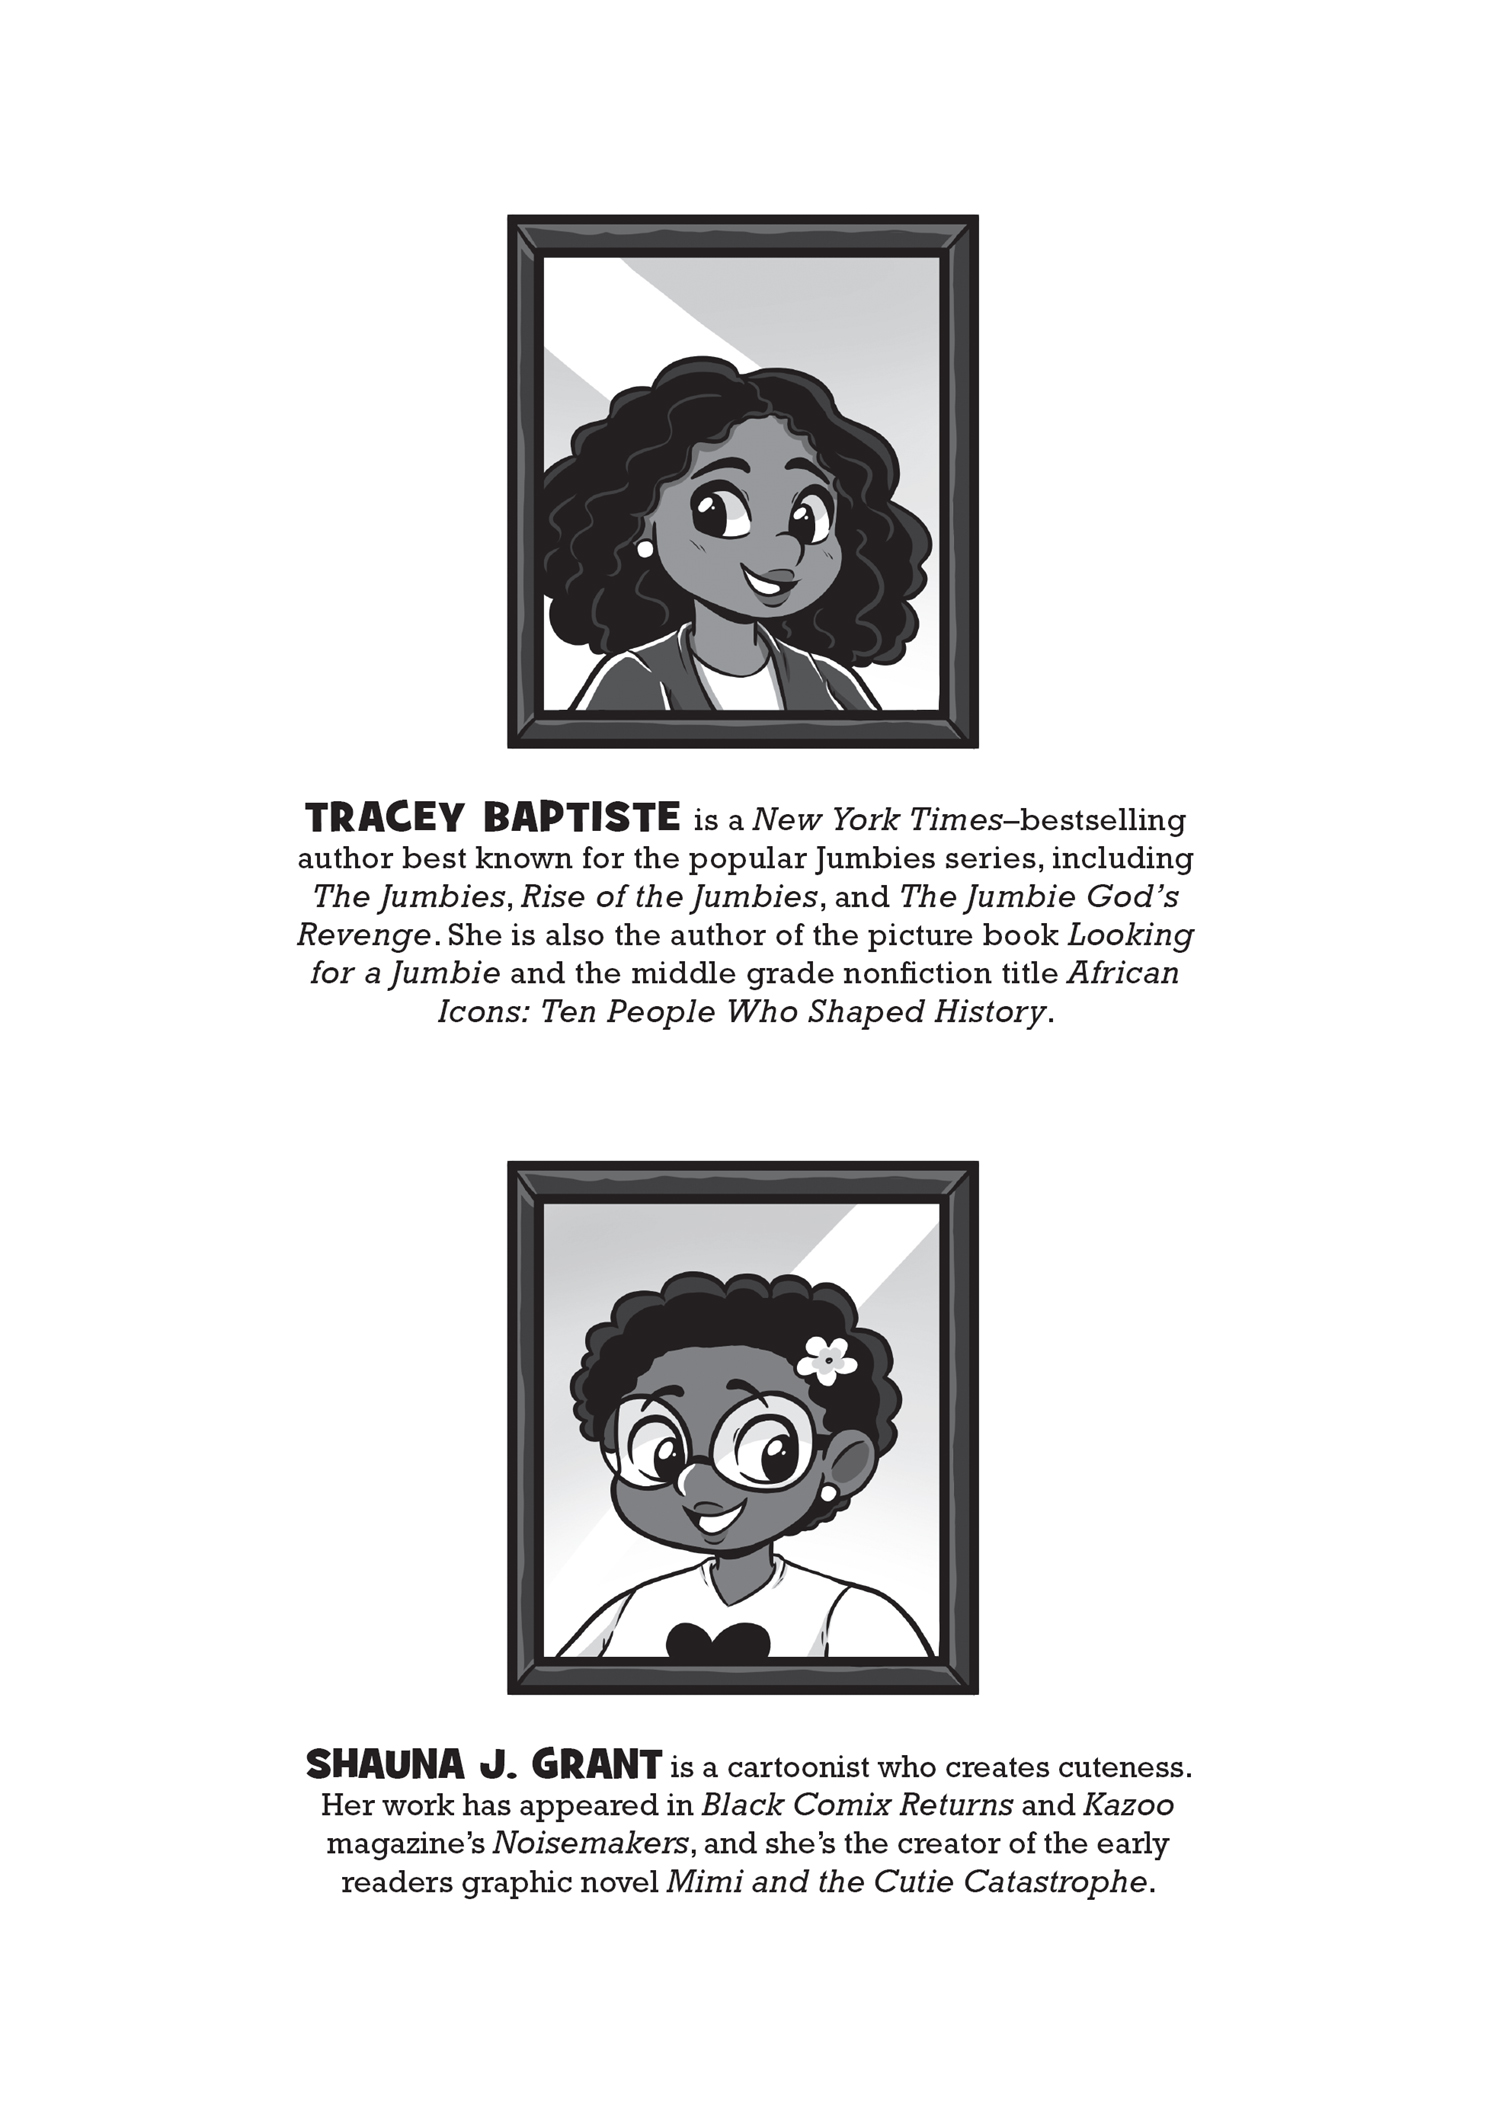 Read online History Comics comic -  Issue # Rosa Parks & Claudette Colvin - Civil Rights Heroes - 128